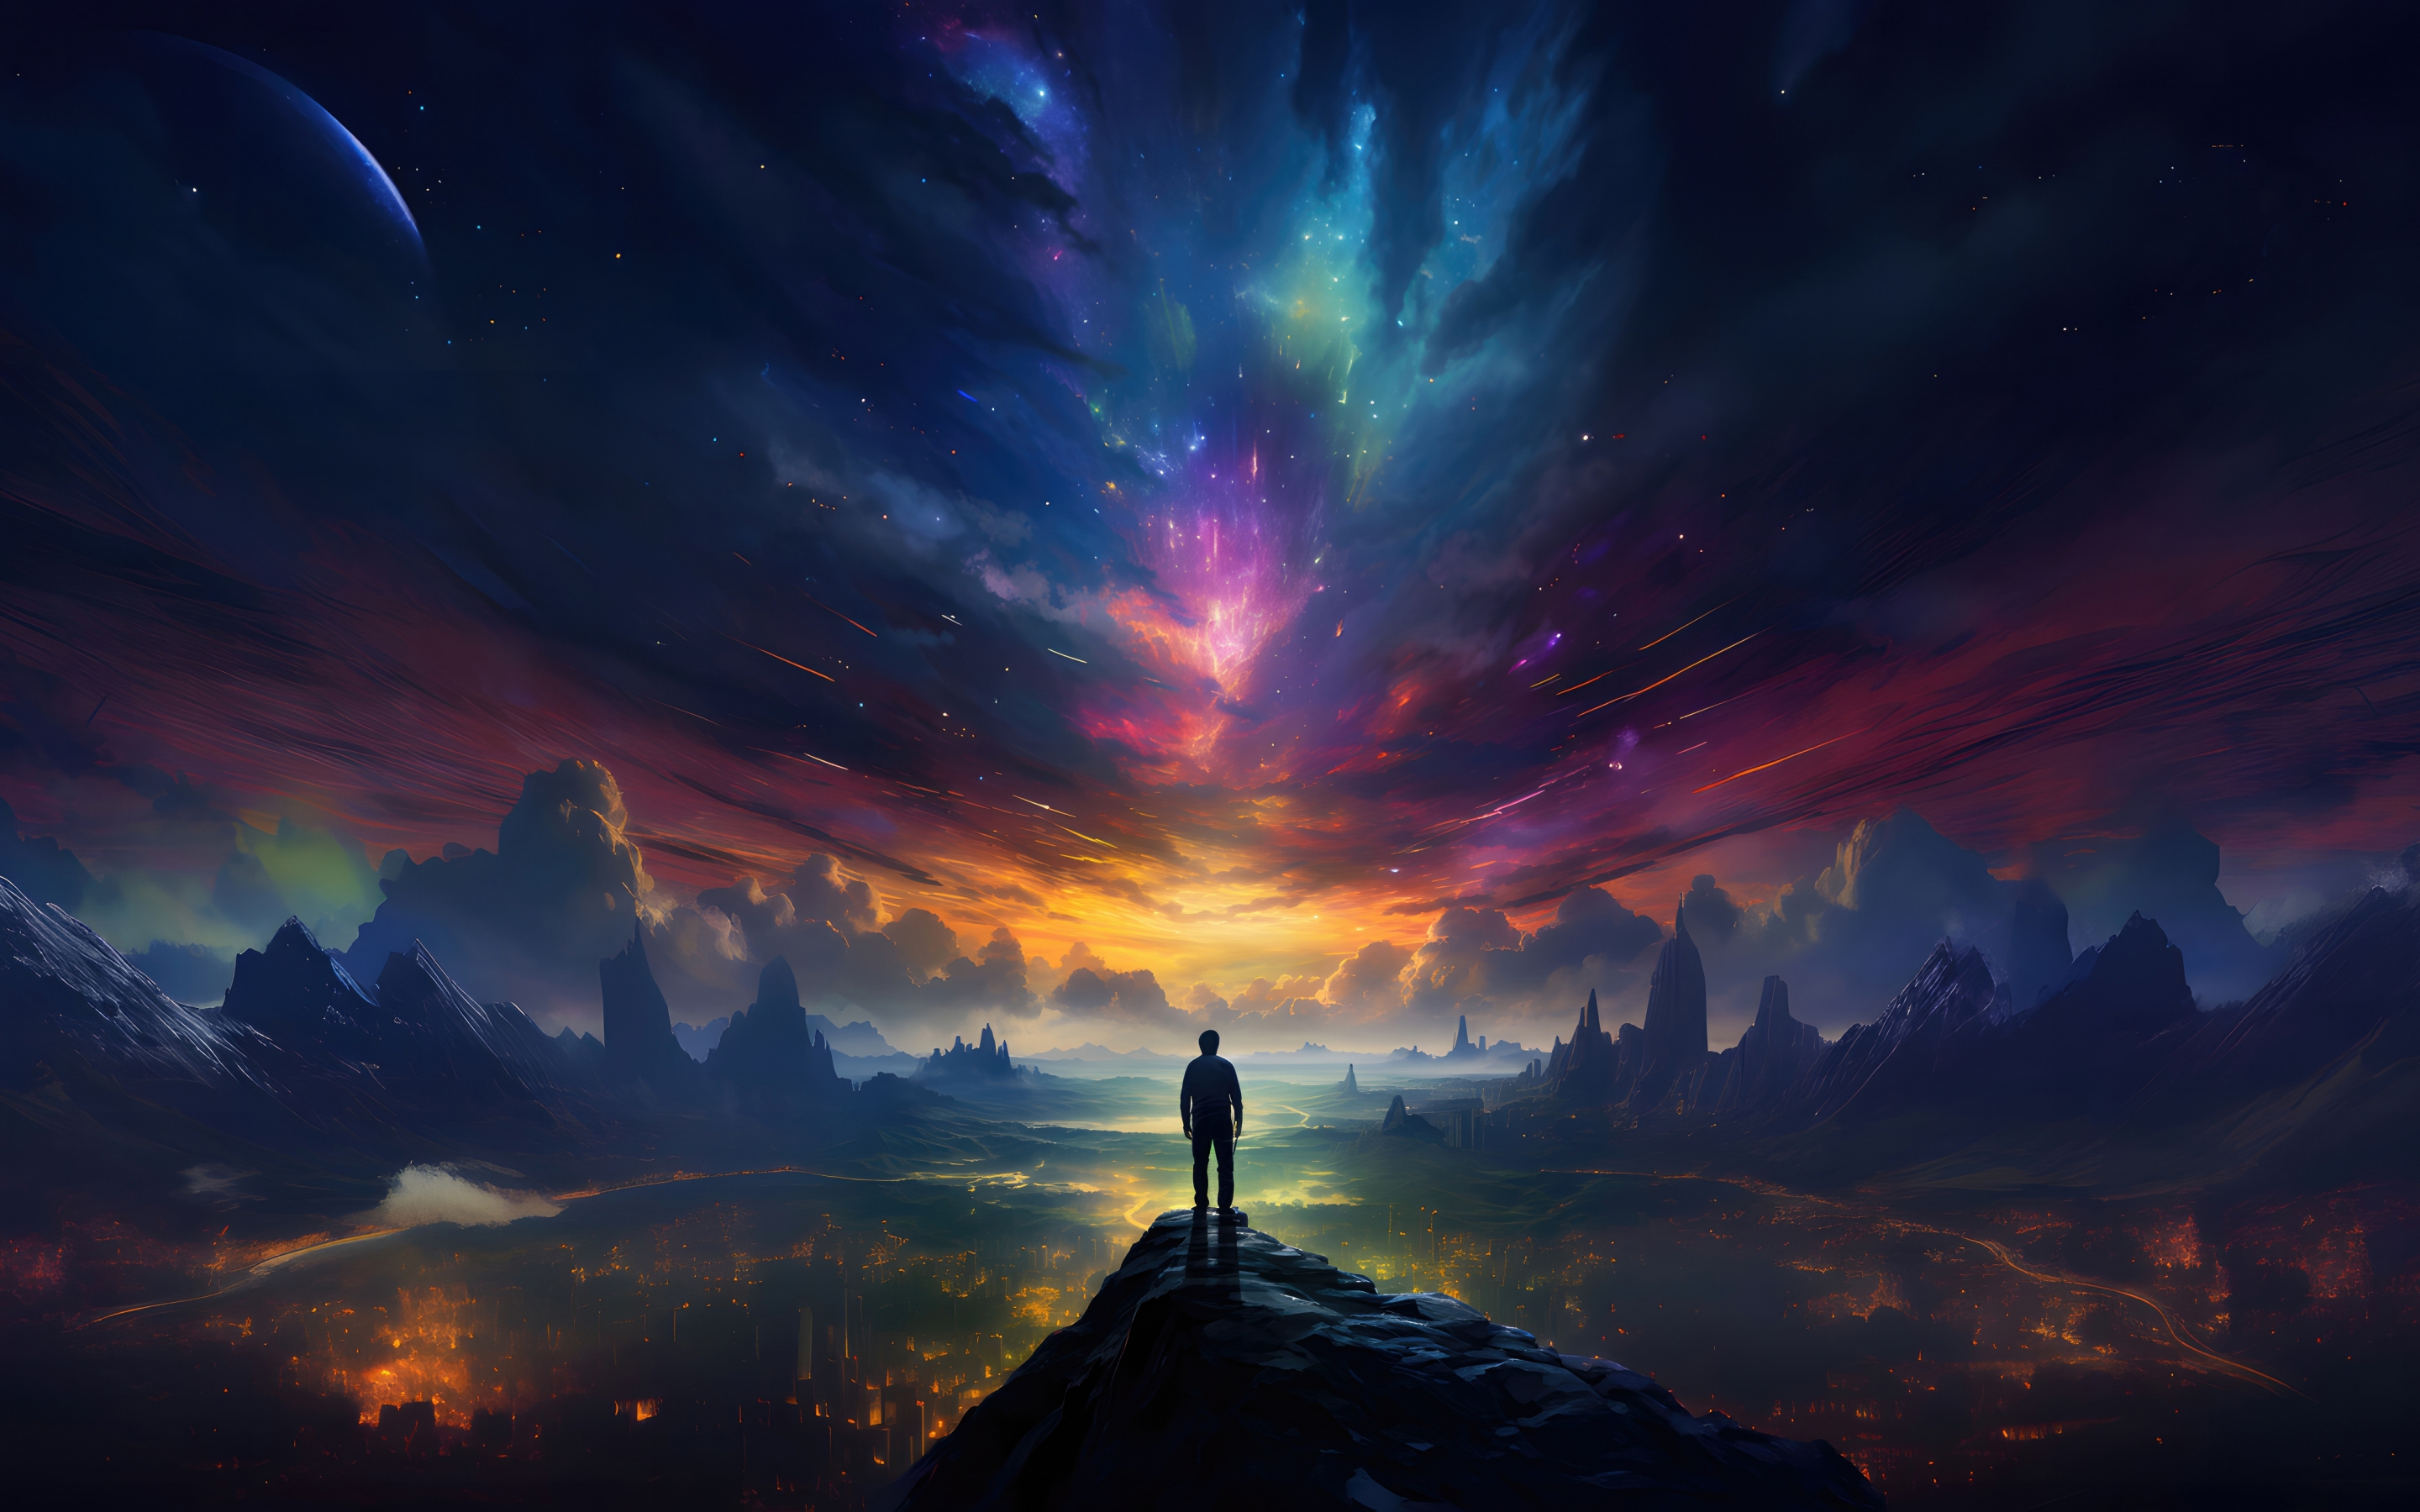 The Dreamy and colourful sky, fantasy, explorer, 2880x1800 wallpaper